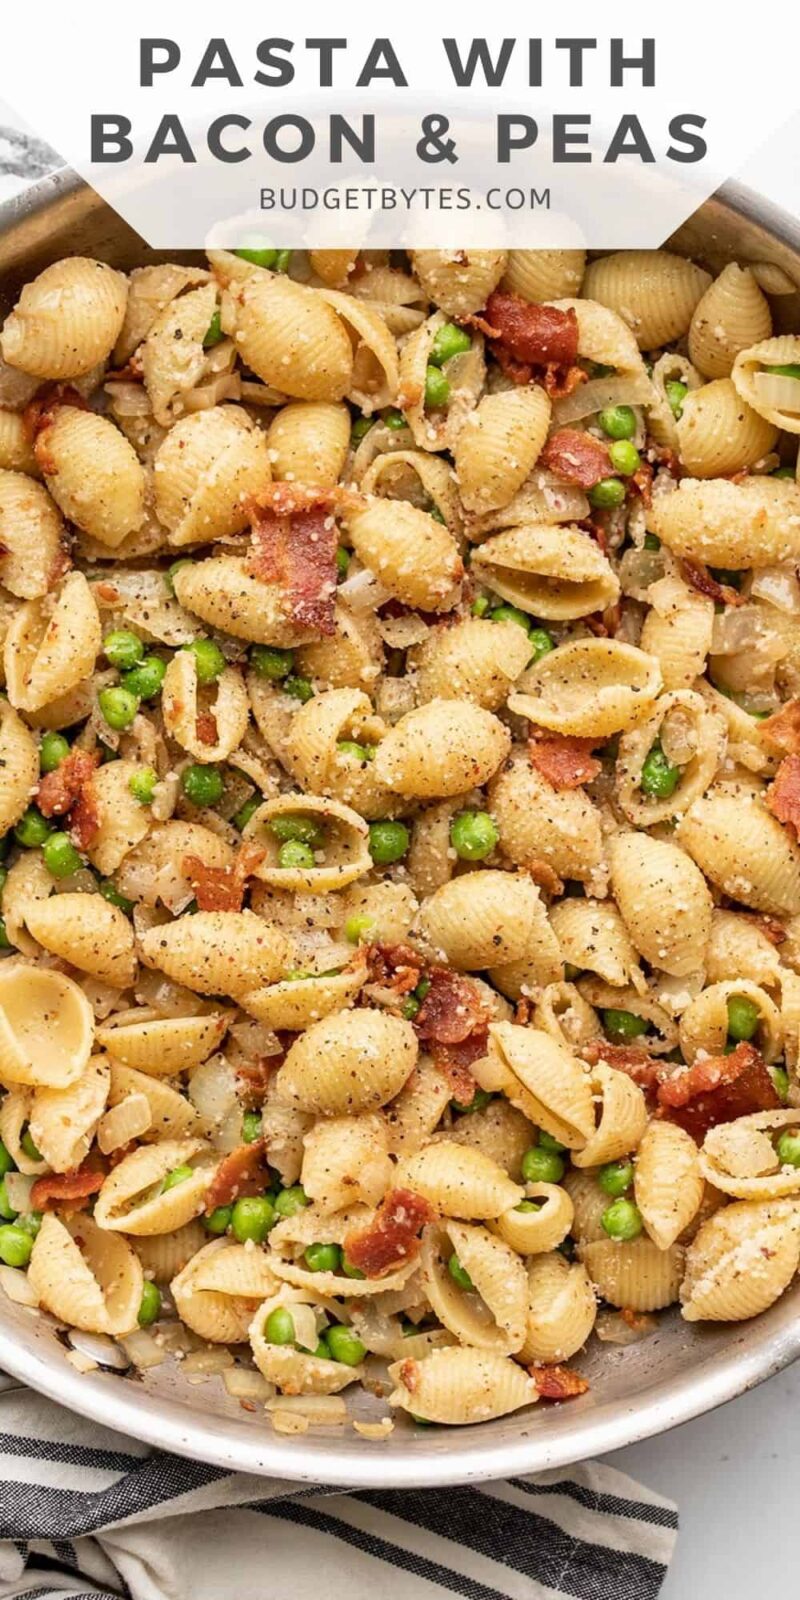 https://www.budgetbytes.com/wp-content/uploads/2022/03/Pasta-with-Bacon-and-Peas-PIN2-800x1600.jpg